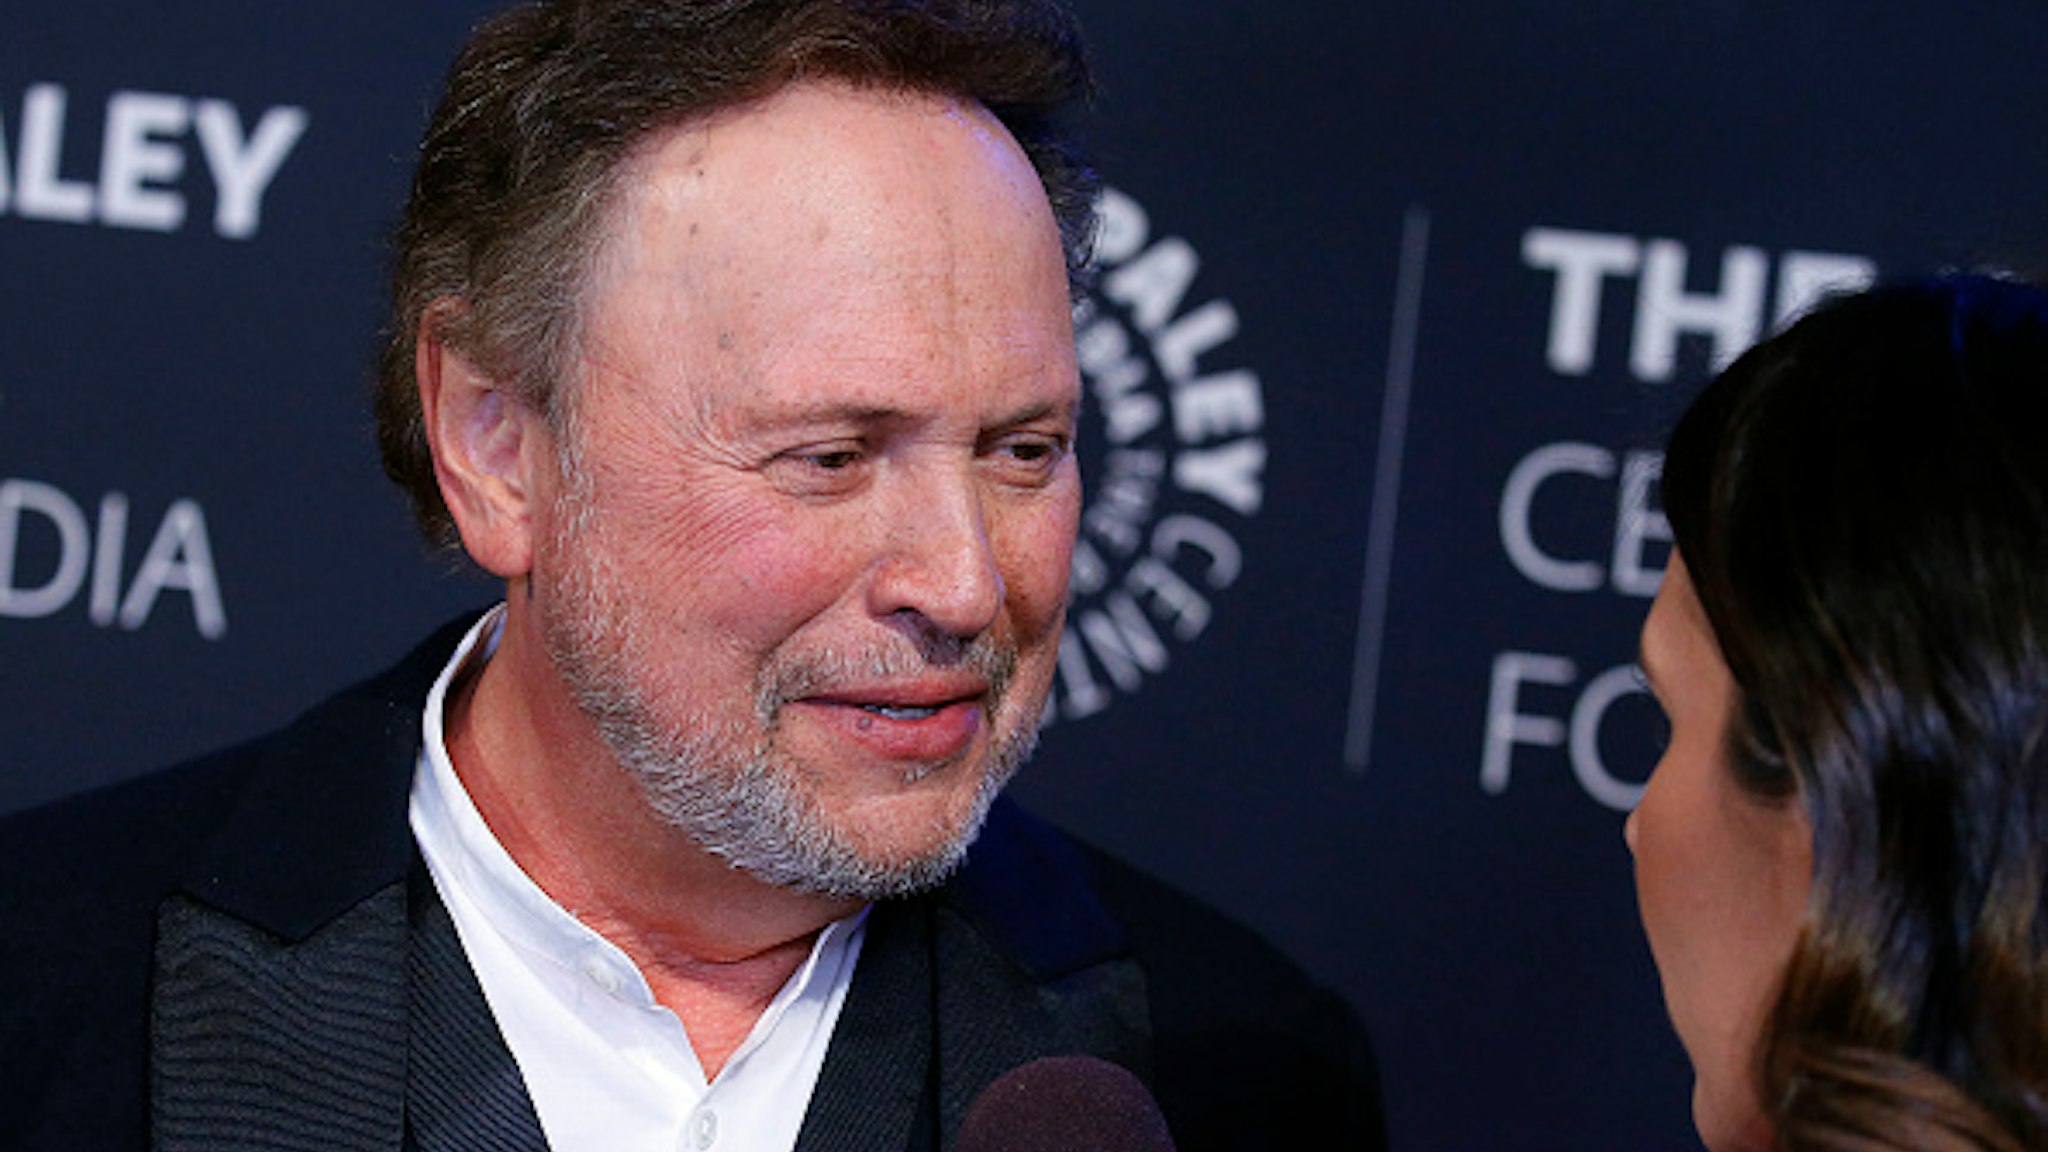 NEW YORK, NEW YORK - MAY 15: Billy Crystal attends The Paley Honors: A Gala Tribute To LGBTQ at The Ziegfeld Ballroom on May 15, 2019 in New York City.